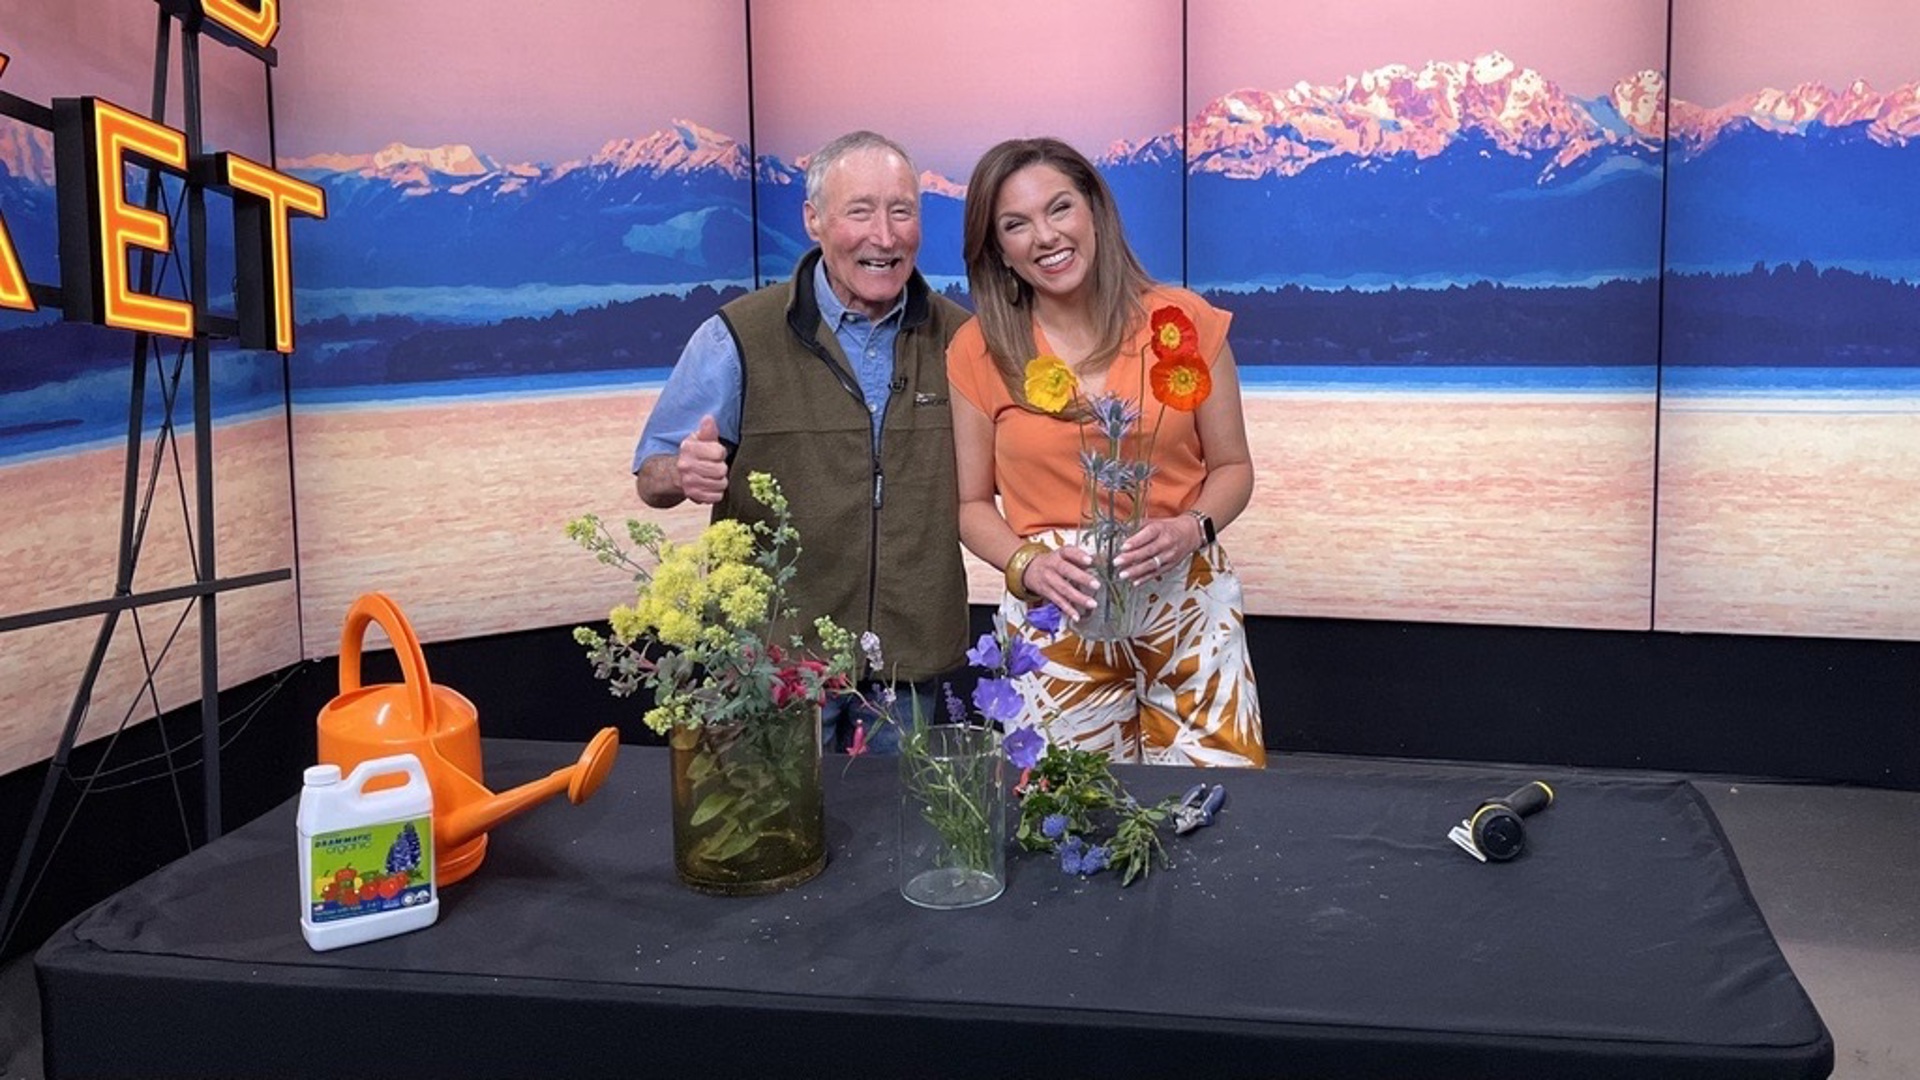 Ciscoe Morris says a border or bed of pollinating plants works well for attracting pollinators. #newdaynw